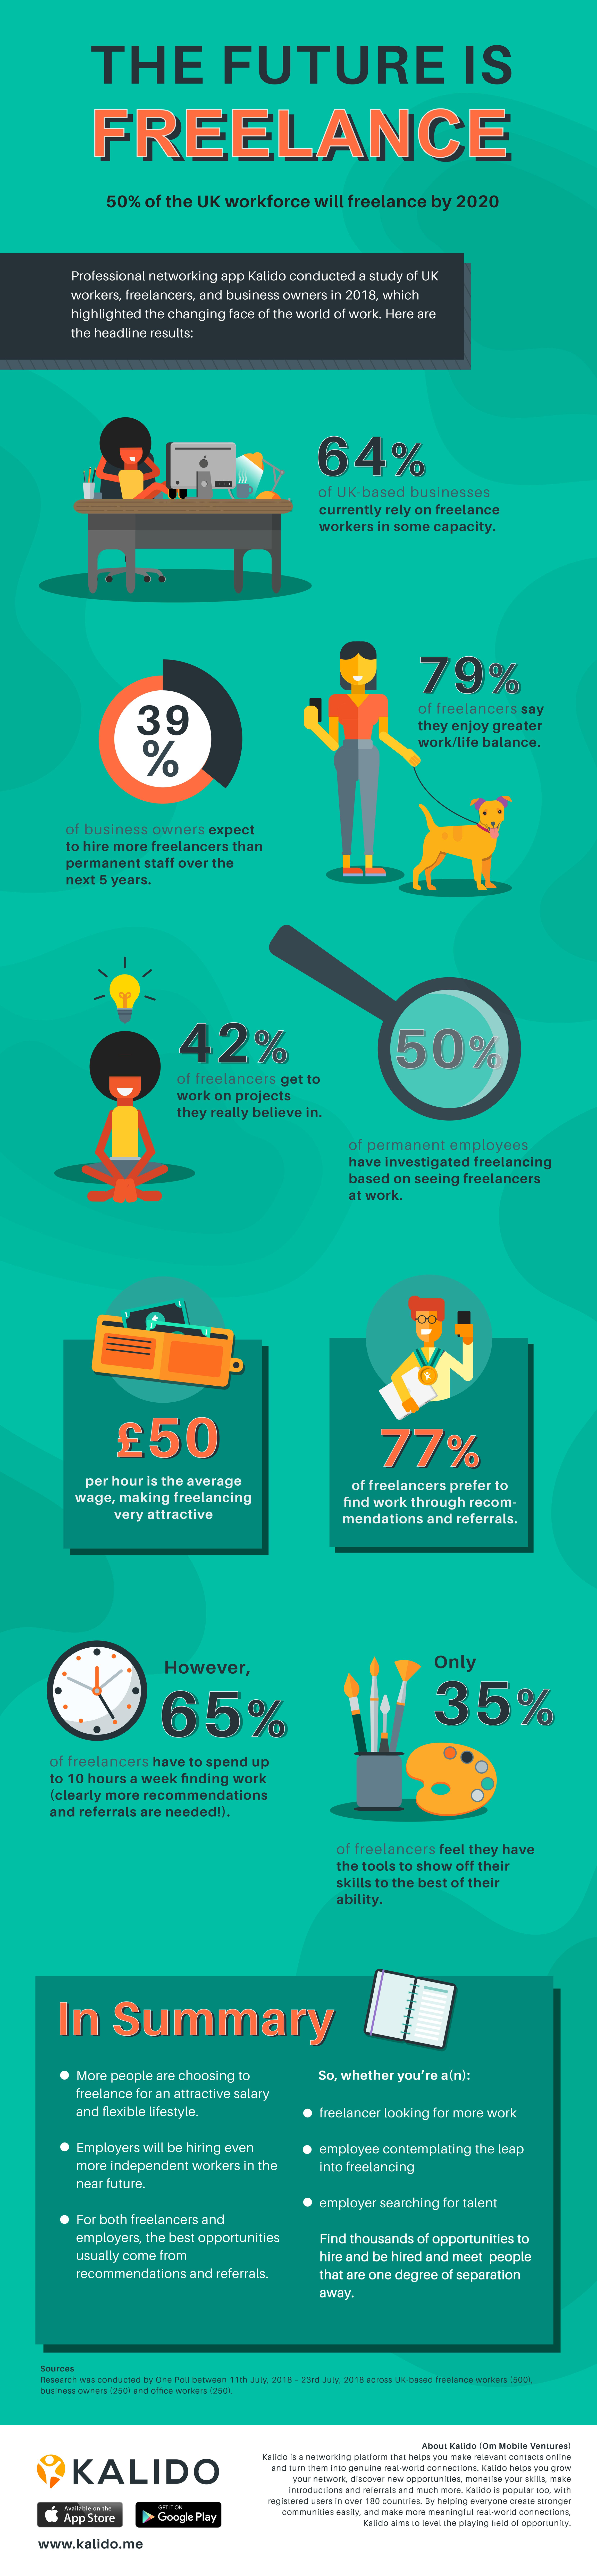 50% of UK workers set to freelance by 2020